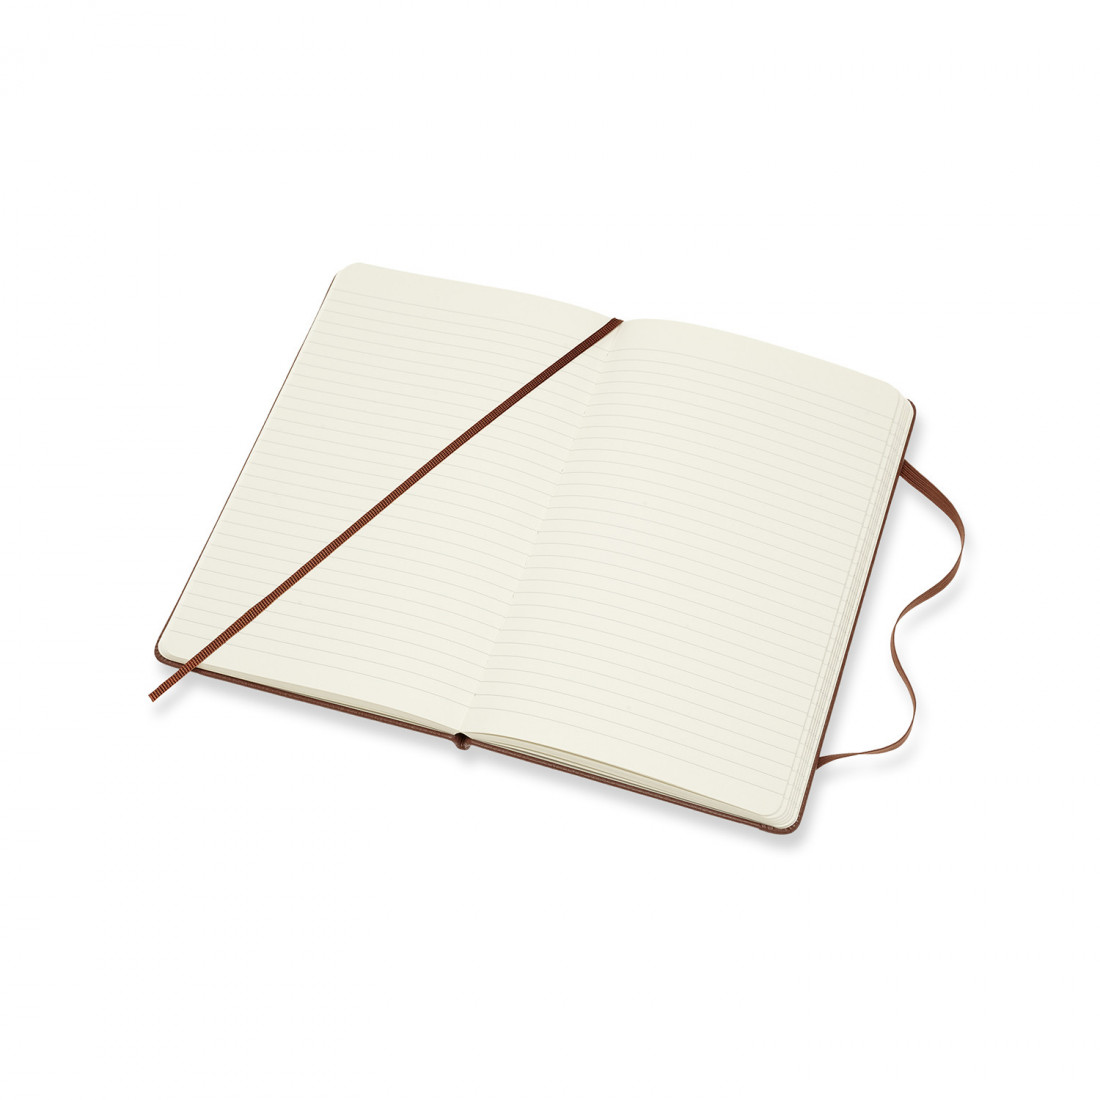 Notebook Limited Edition Leather Sepia Brown Large 13x21 Moleskine